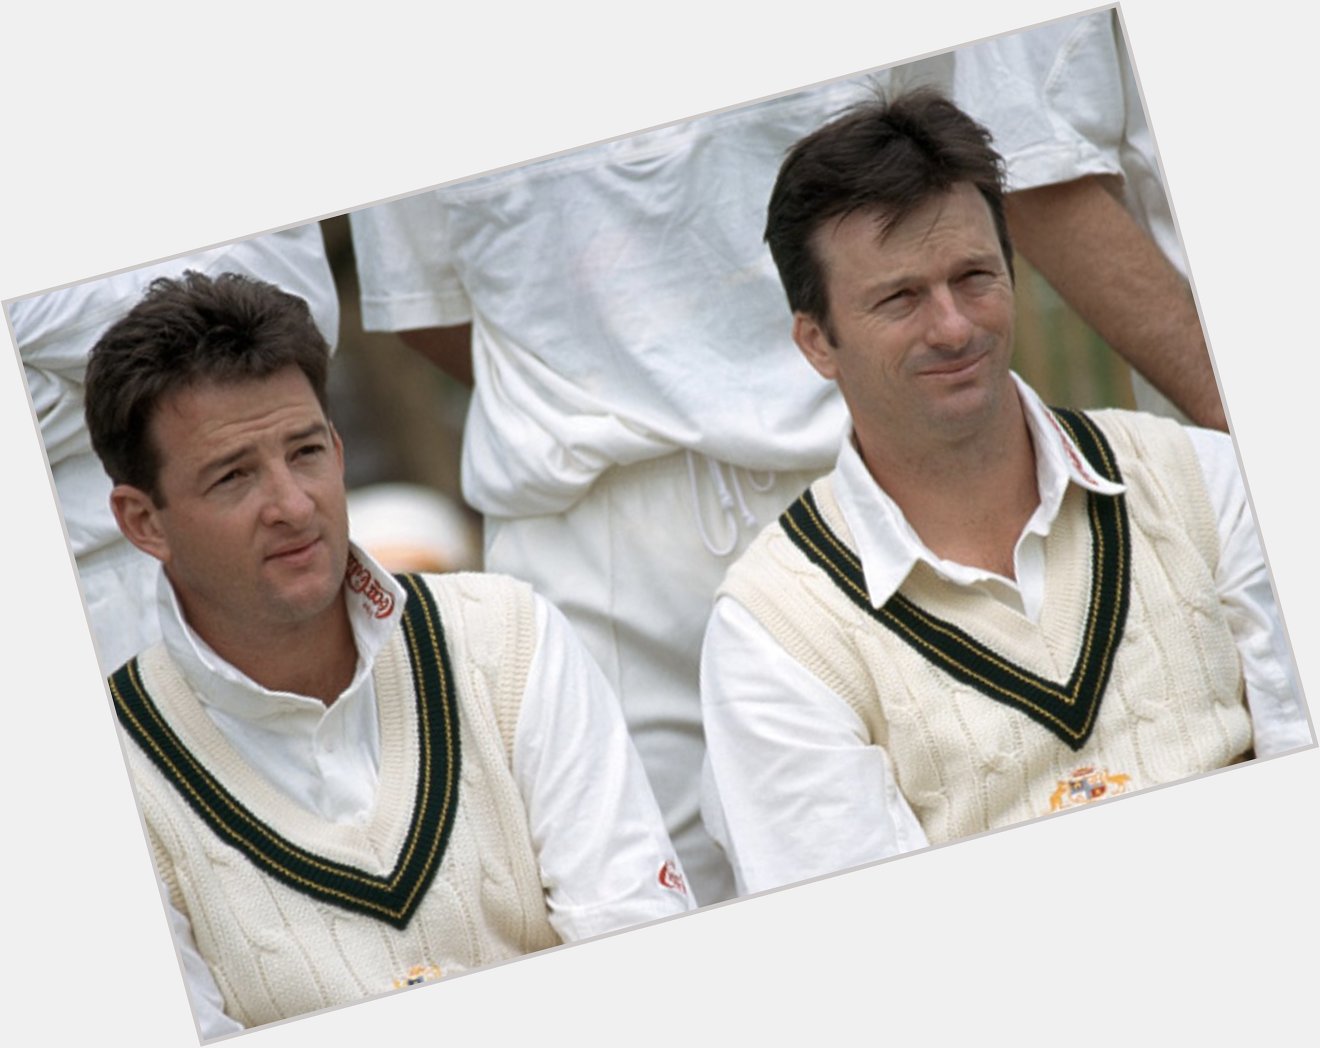 Happy Birthday to Mark & Steve Waugh who produced a combined 35,025 runs and 431 wickets at international level!  